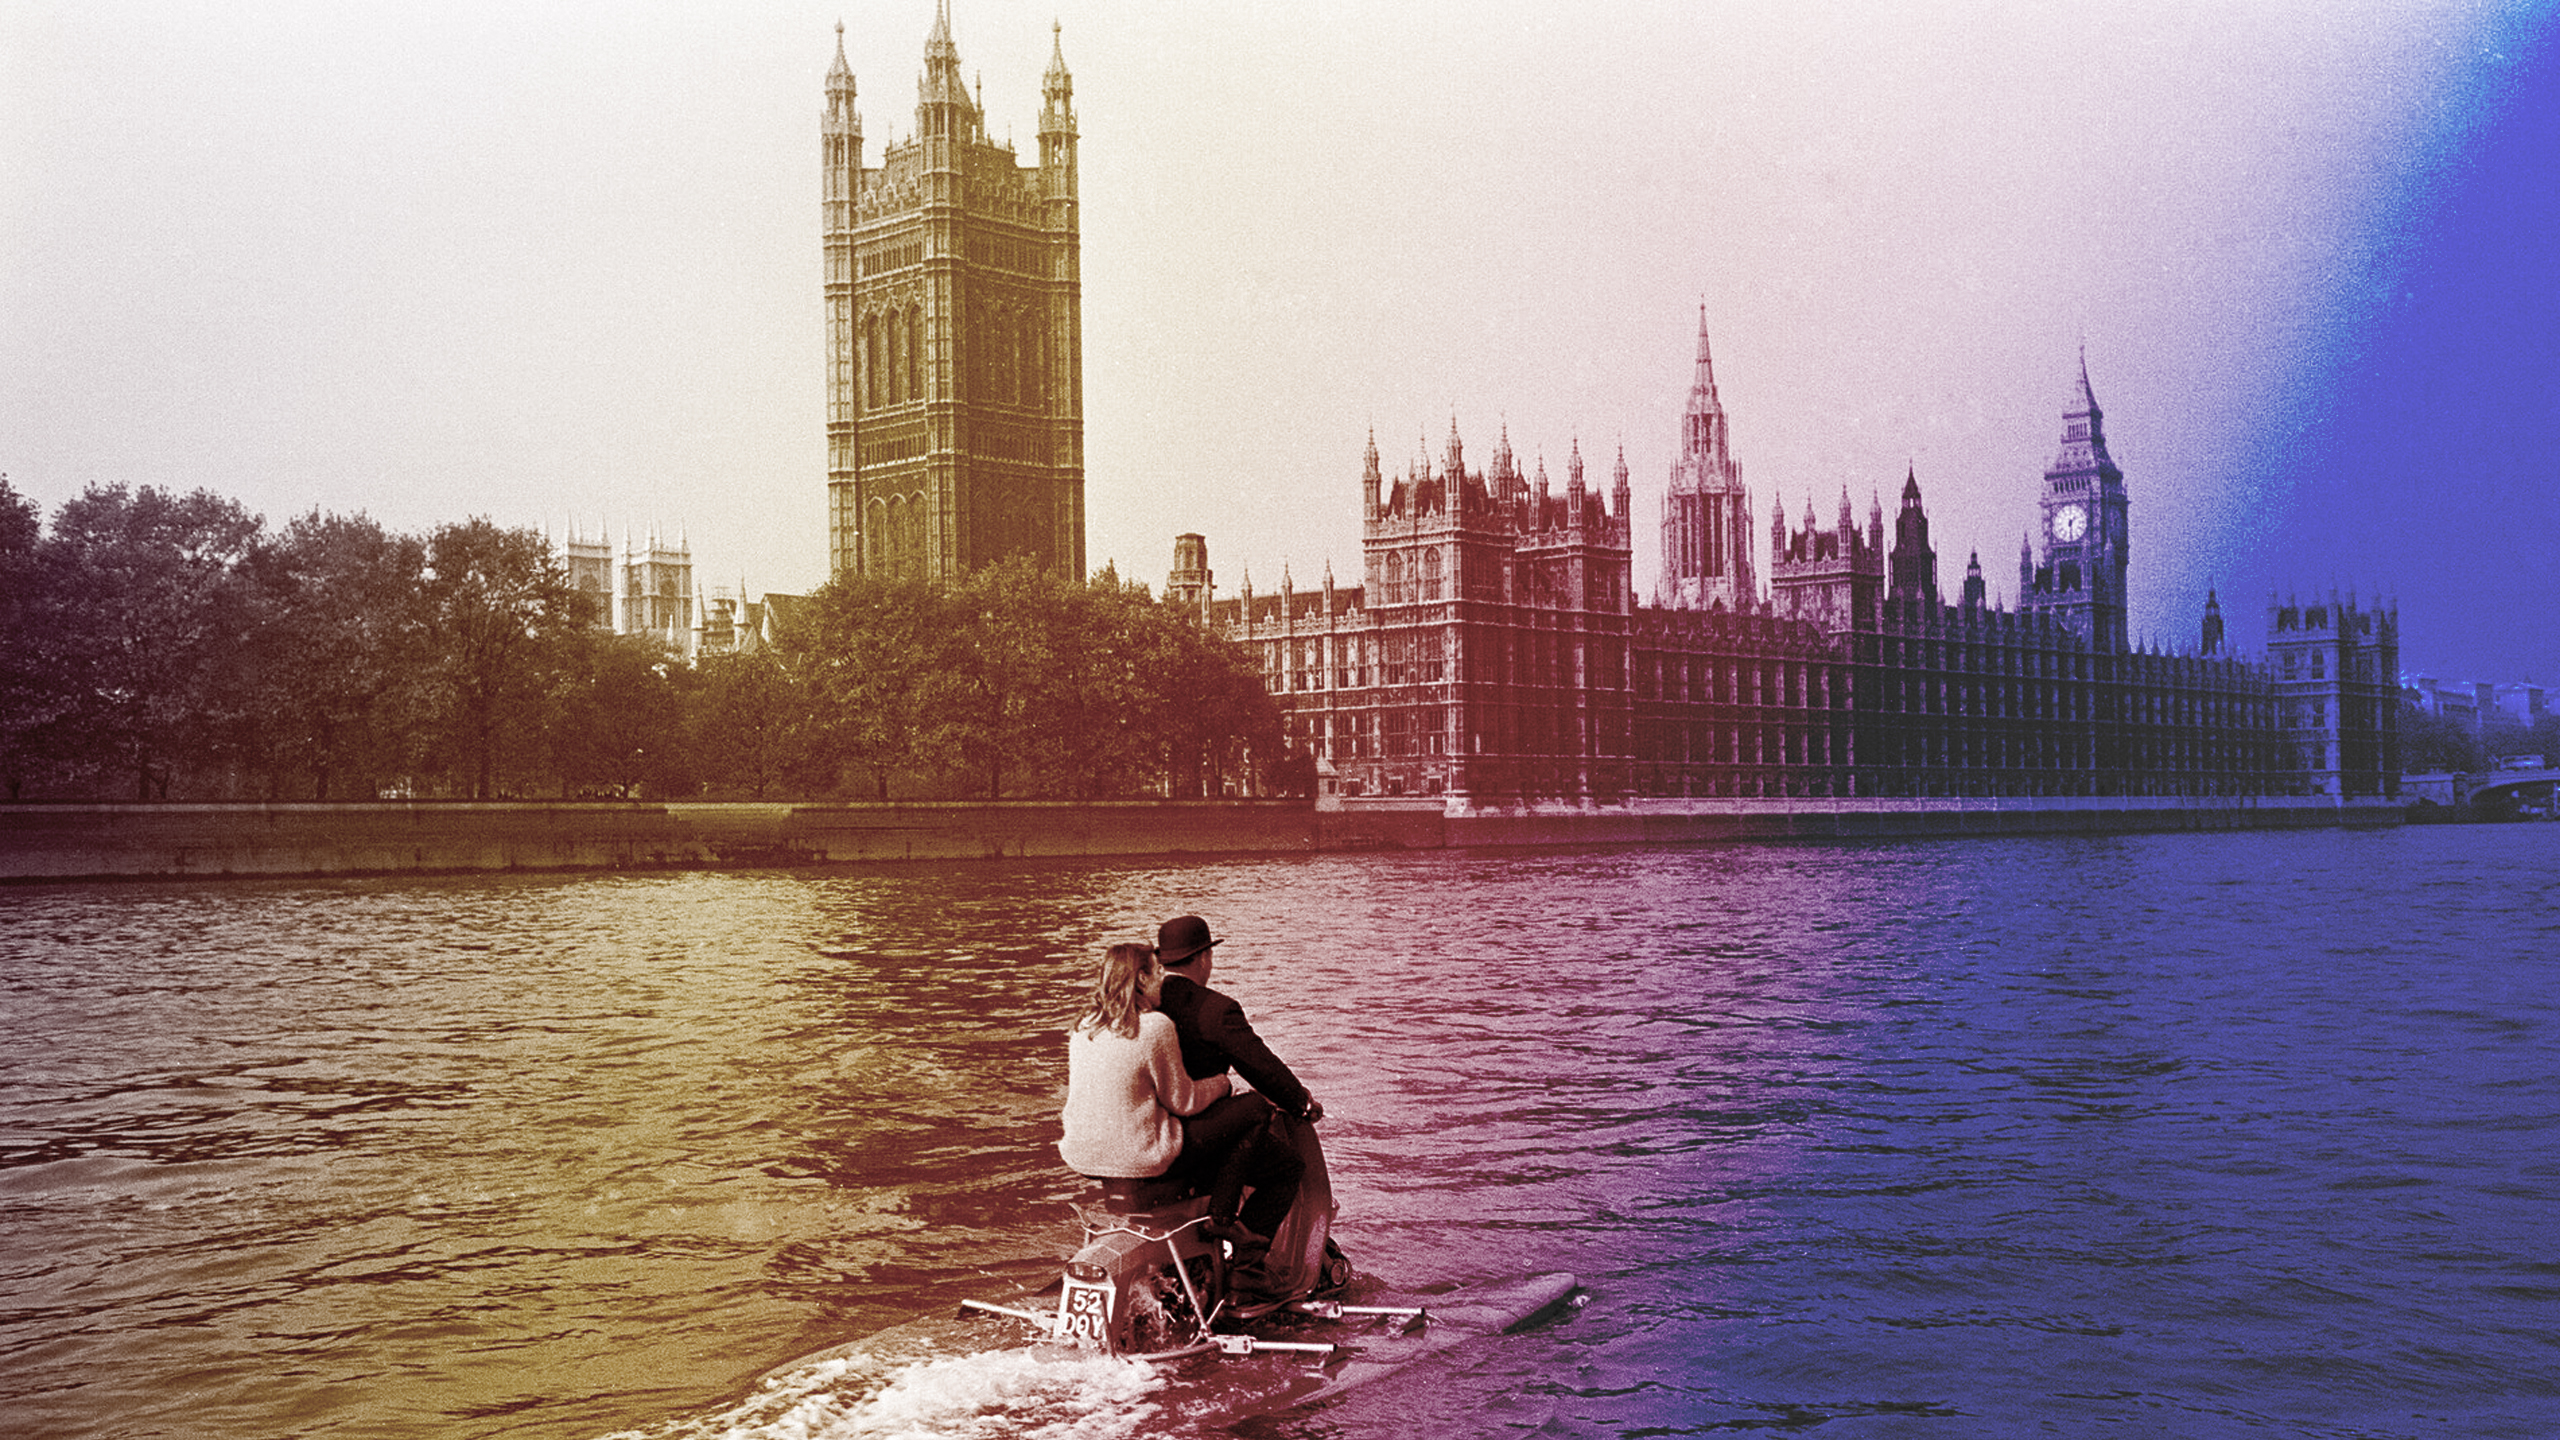 Image for Mods & Rockers: Haus Musik. Two people on a small bicycle boat on the Thames in front of the British house of parliament